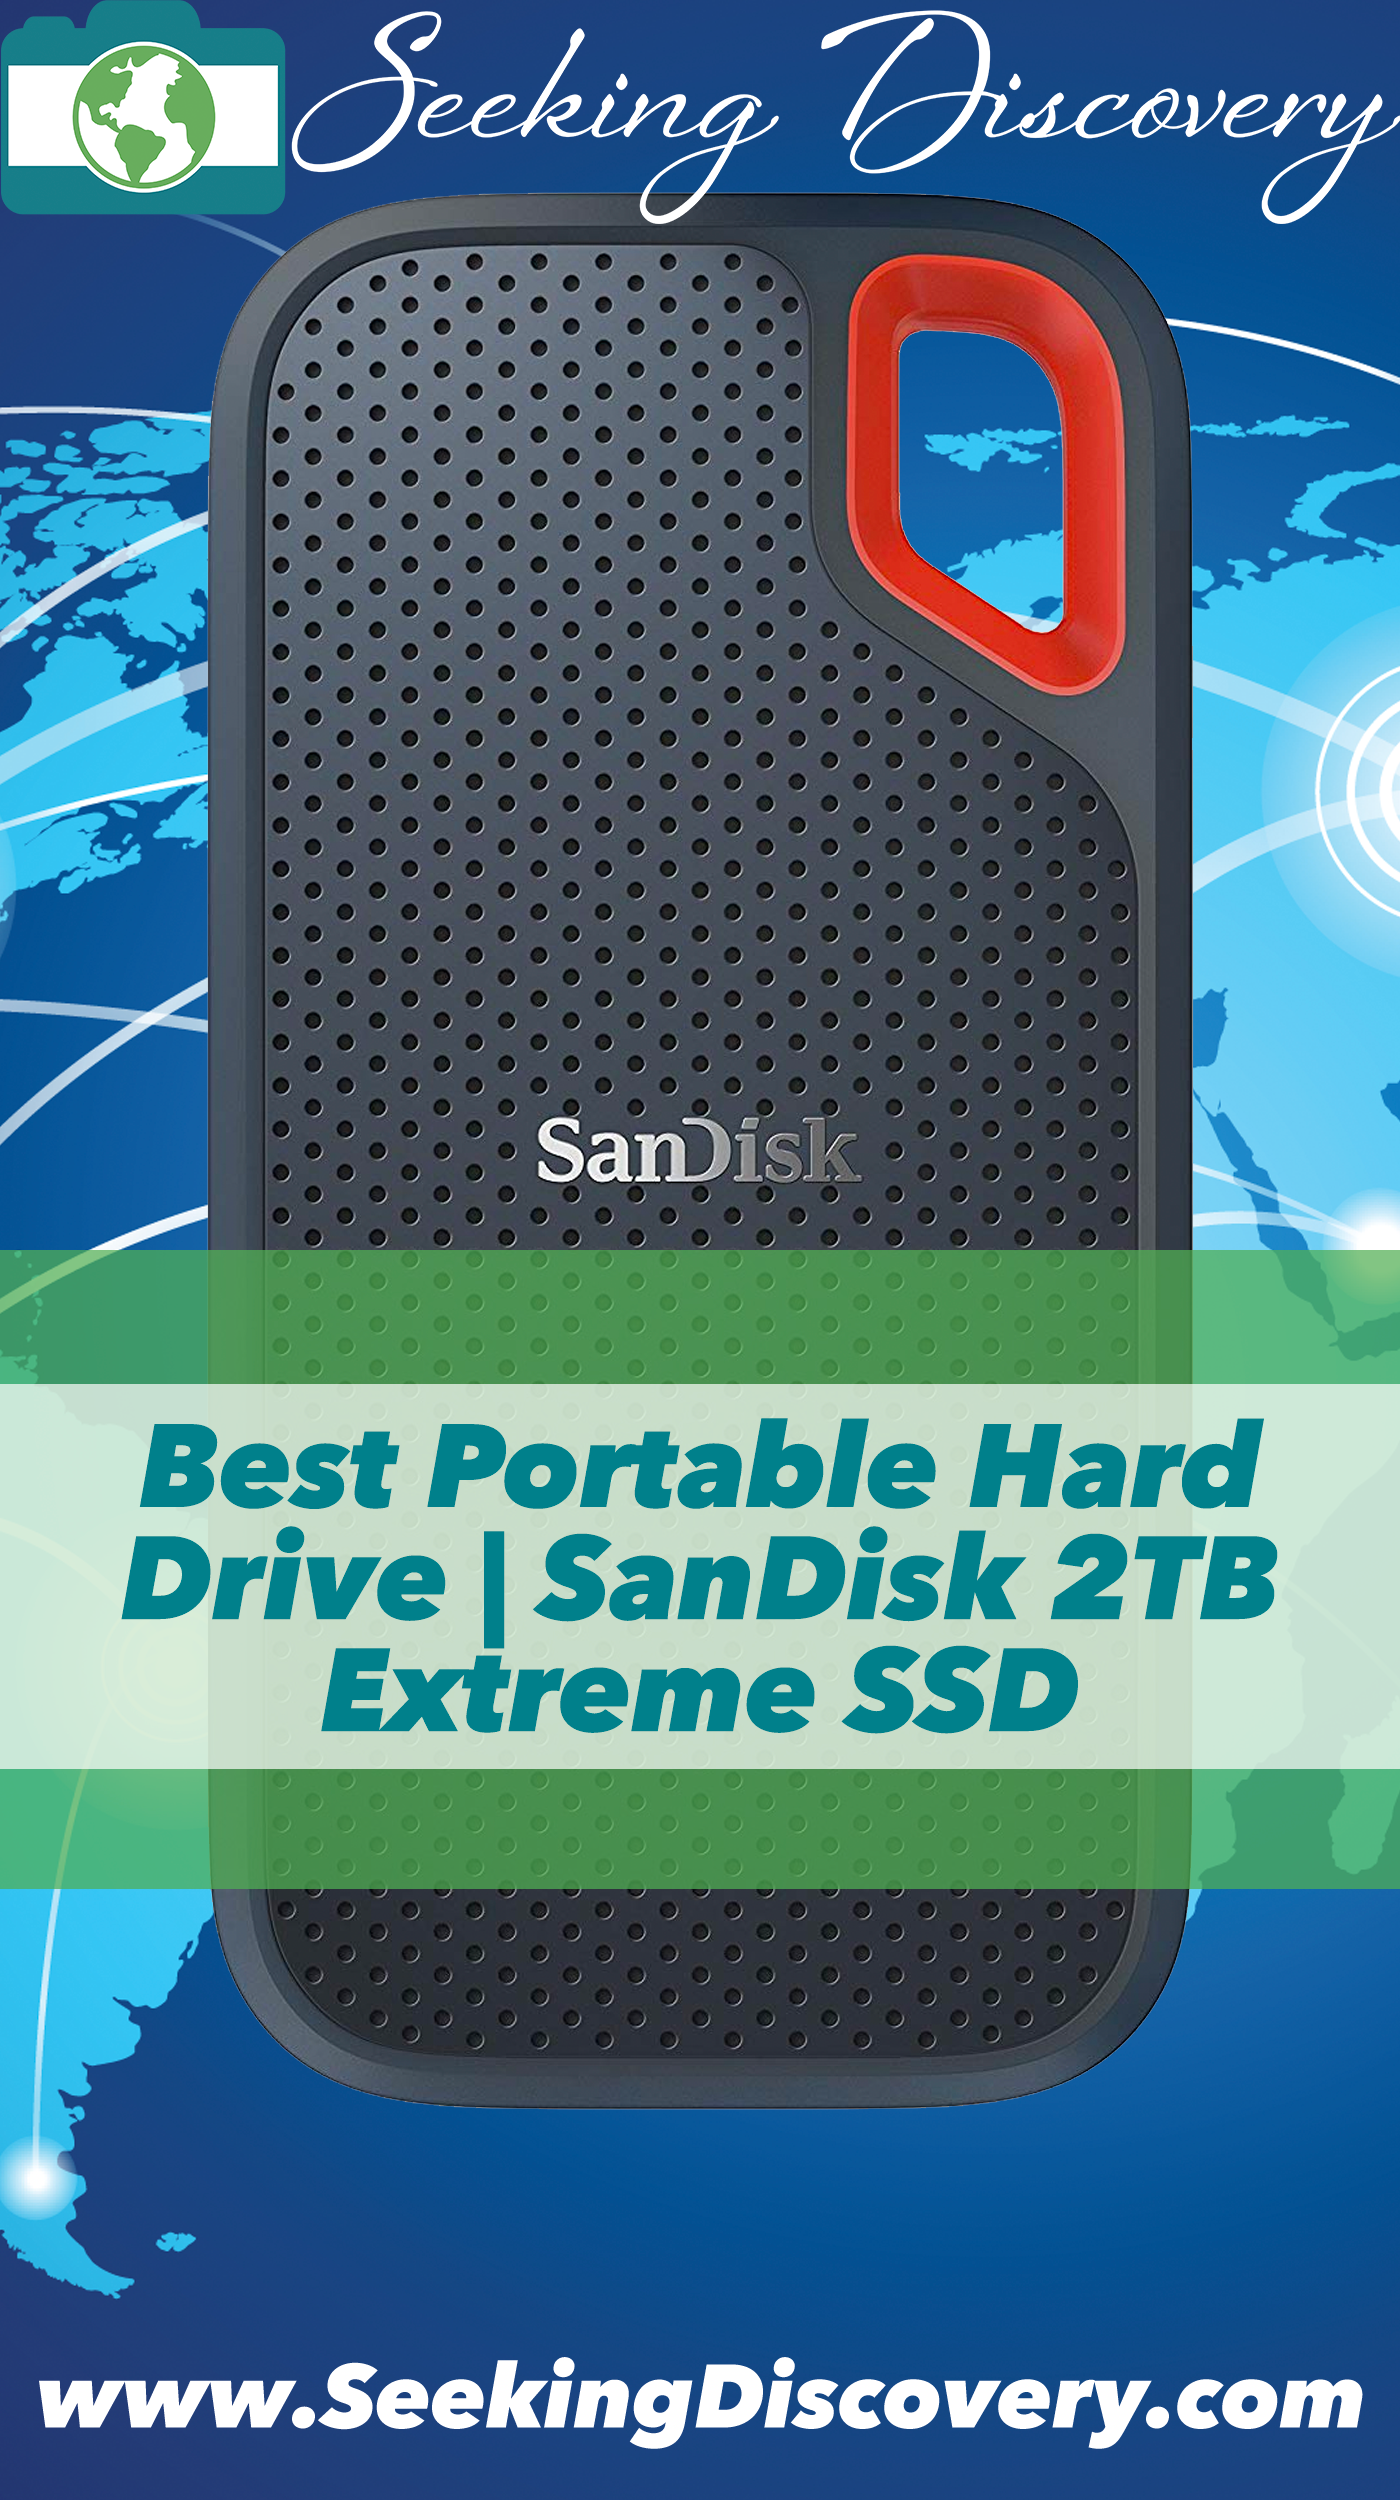 Best Portable Hard Drive | SanDisk 2TB Extreme SSD